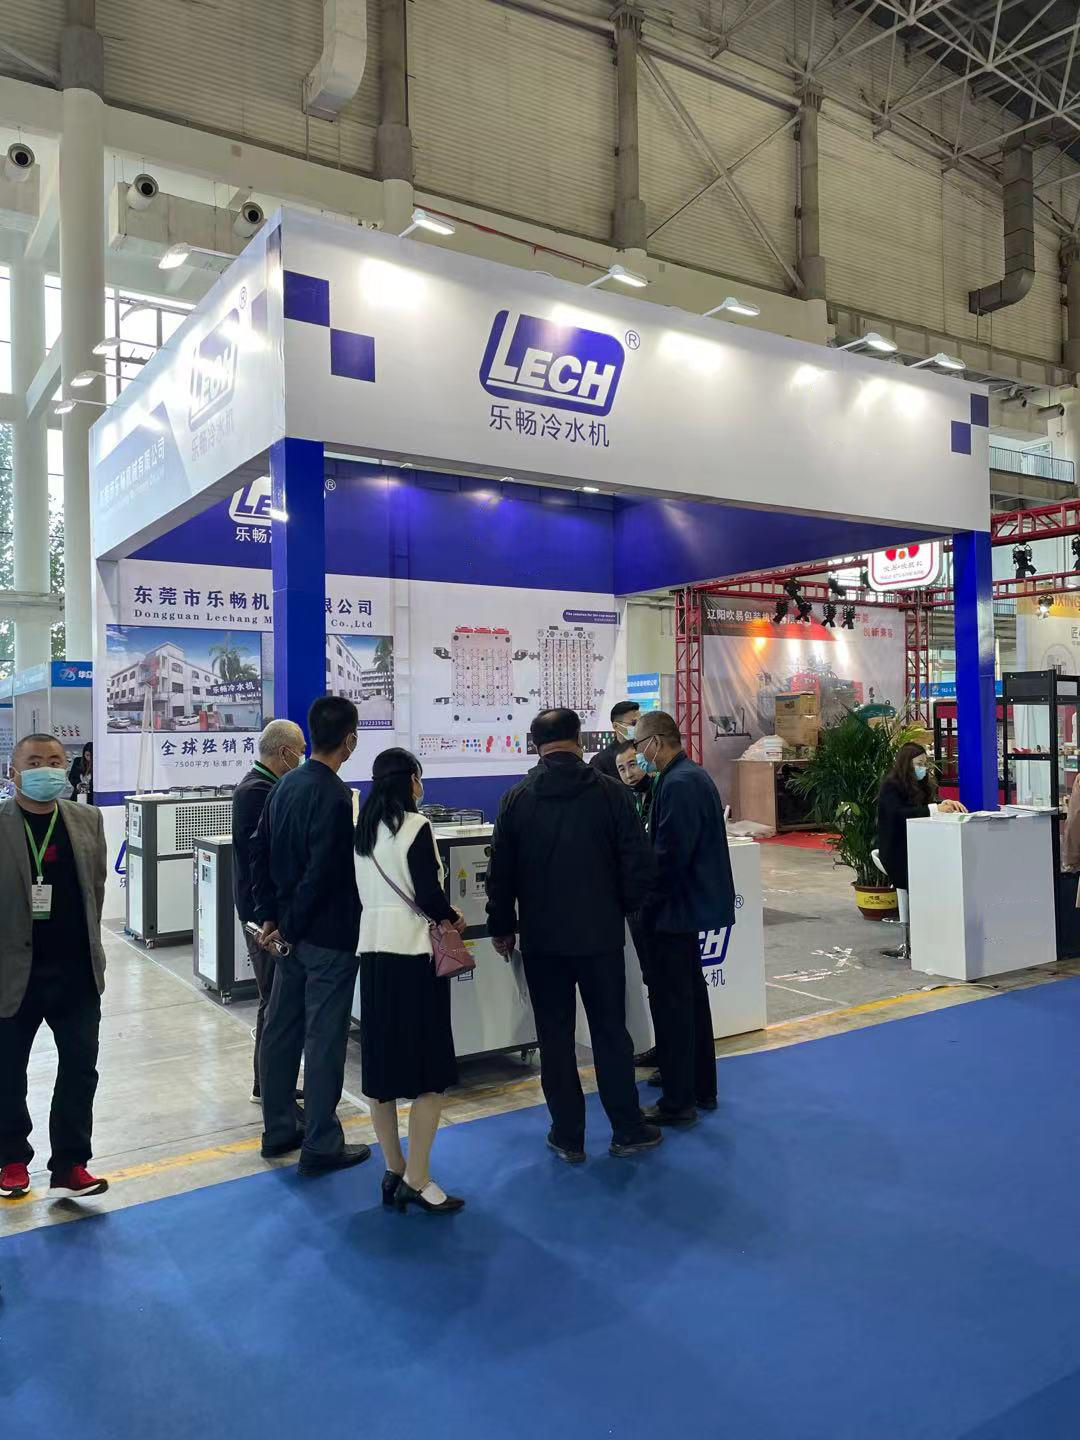 Lechang chiller participated in the exhibition at Cangzhou, and the harvest was full